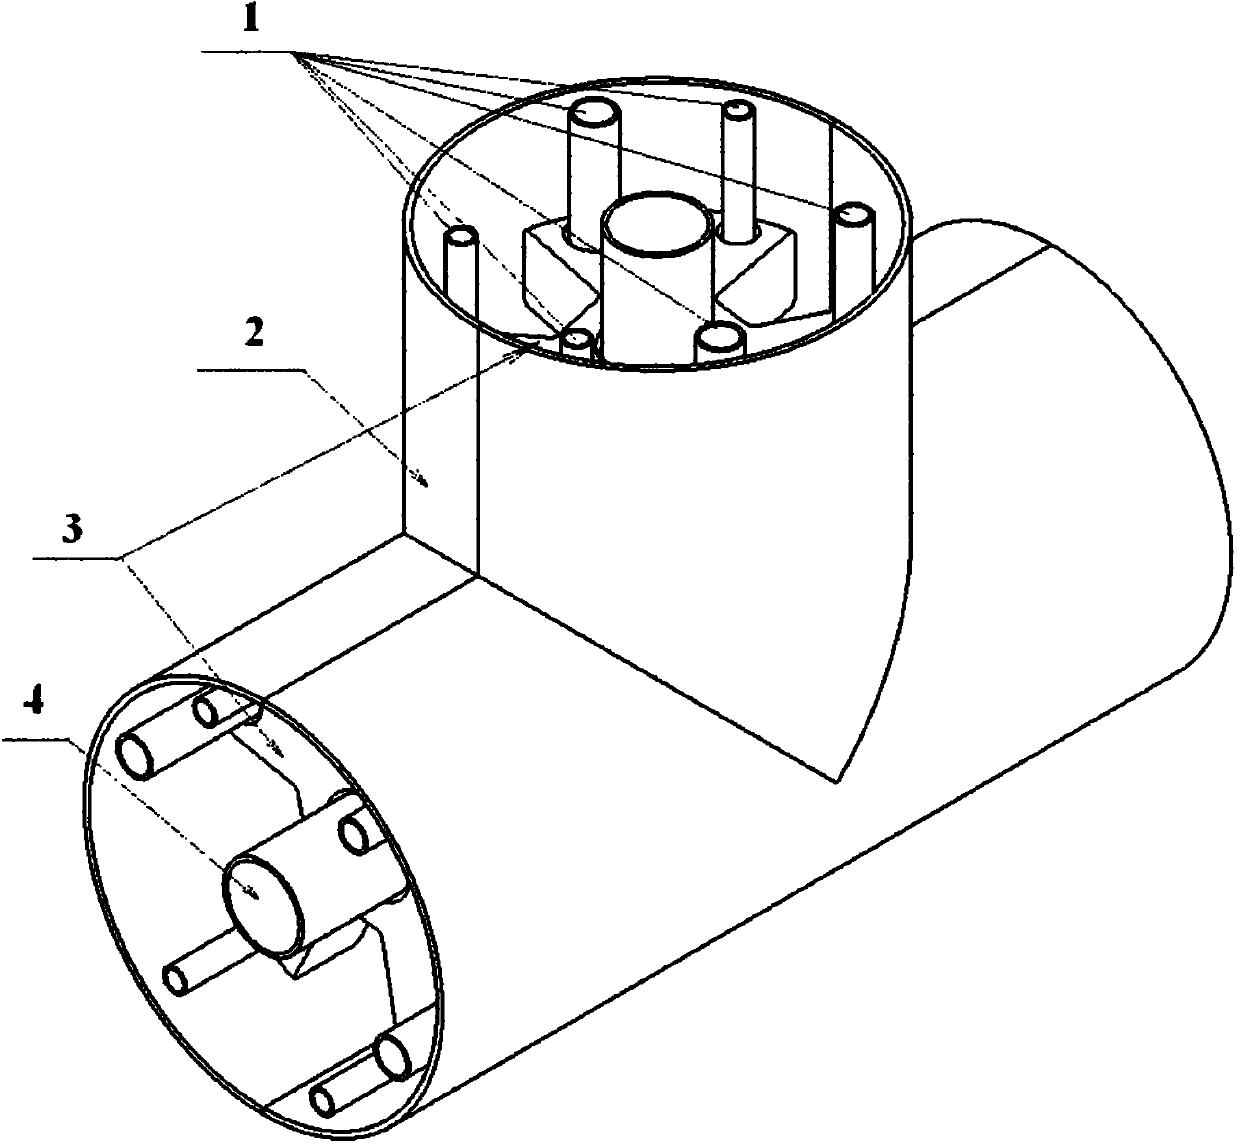 Composite multi-pipeline tee joint structure assembly